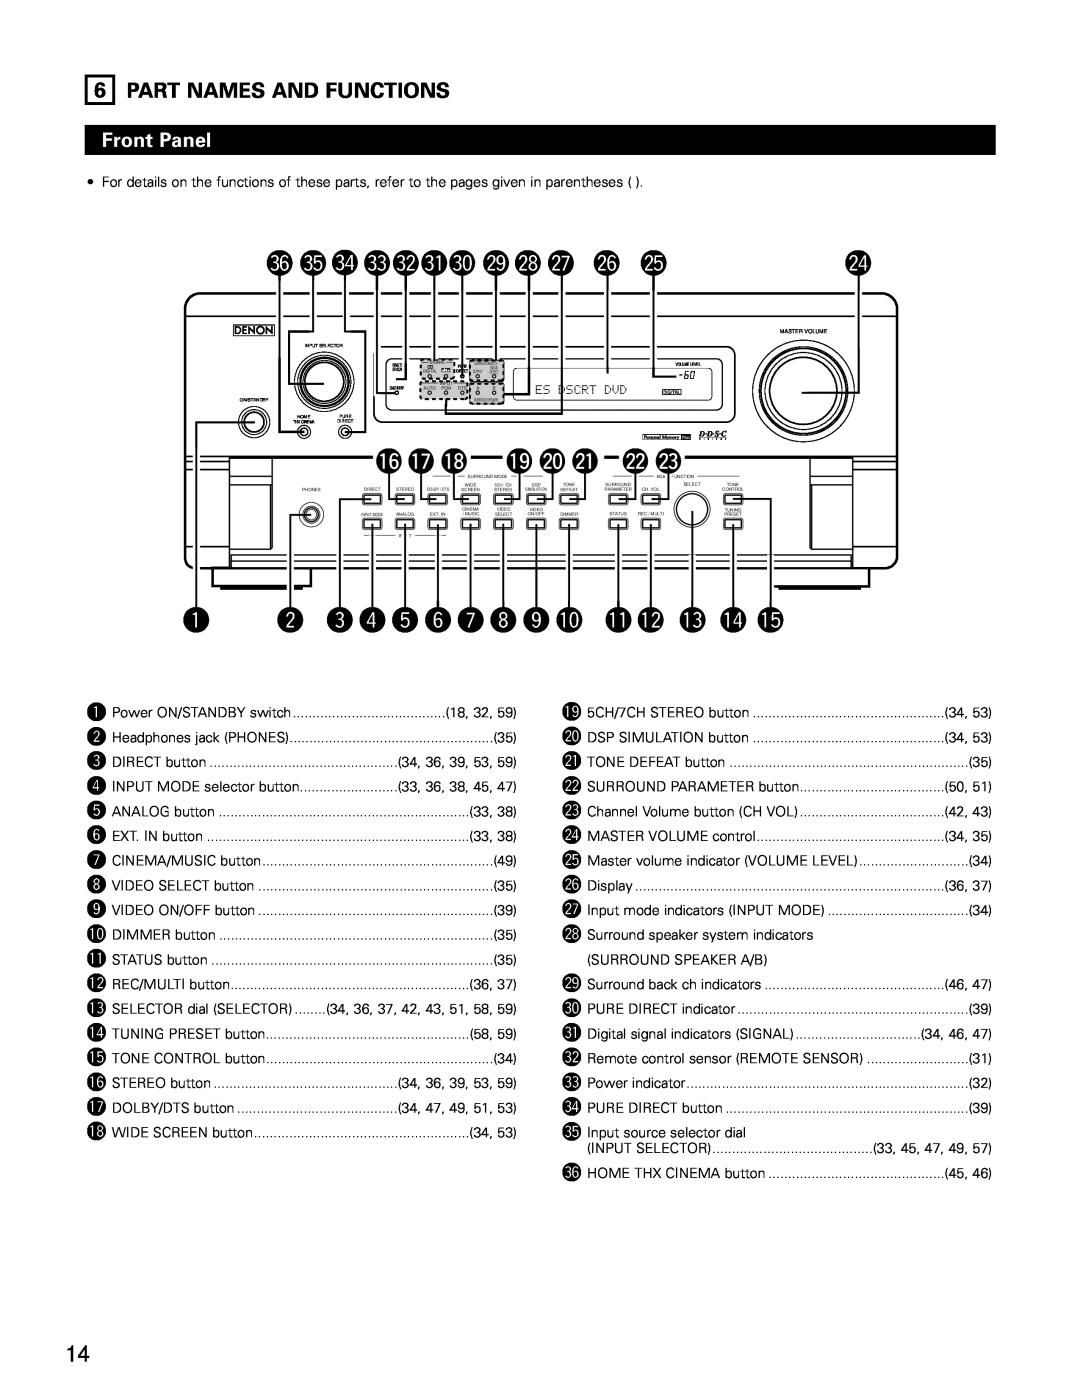 Denon AVR-4802 manual 6!7!8 !9@0@1 @2@3, w e r t y u i o !0 !1!2!3!4!5, Part Names And Functions, Front Panel 